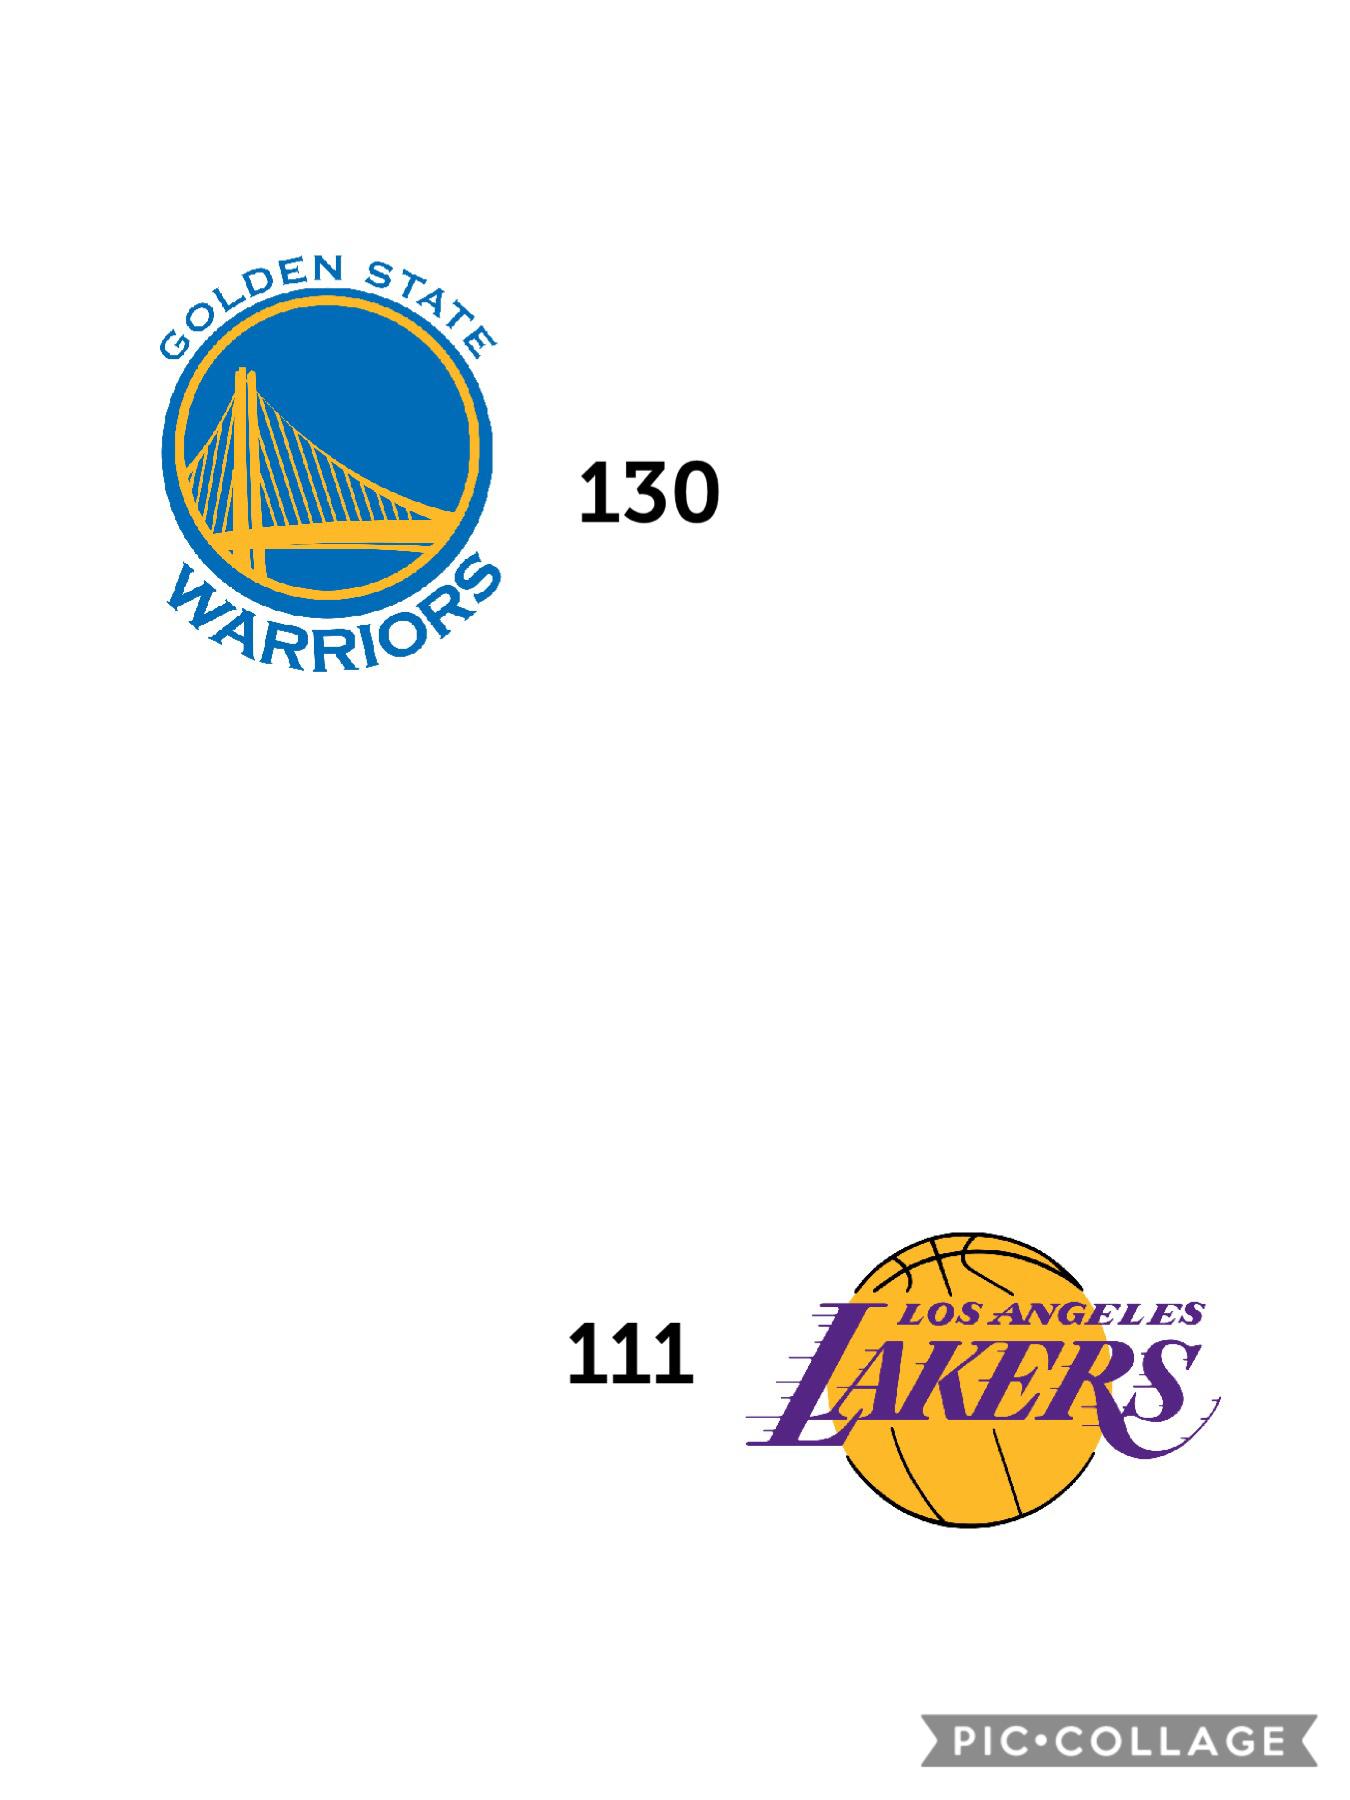 Warriors took on the Lakers on Monday and happily took the 19 point victory!